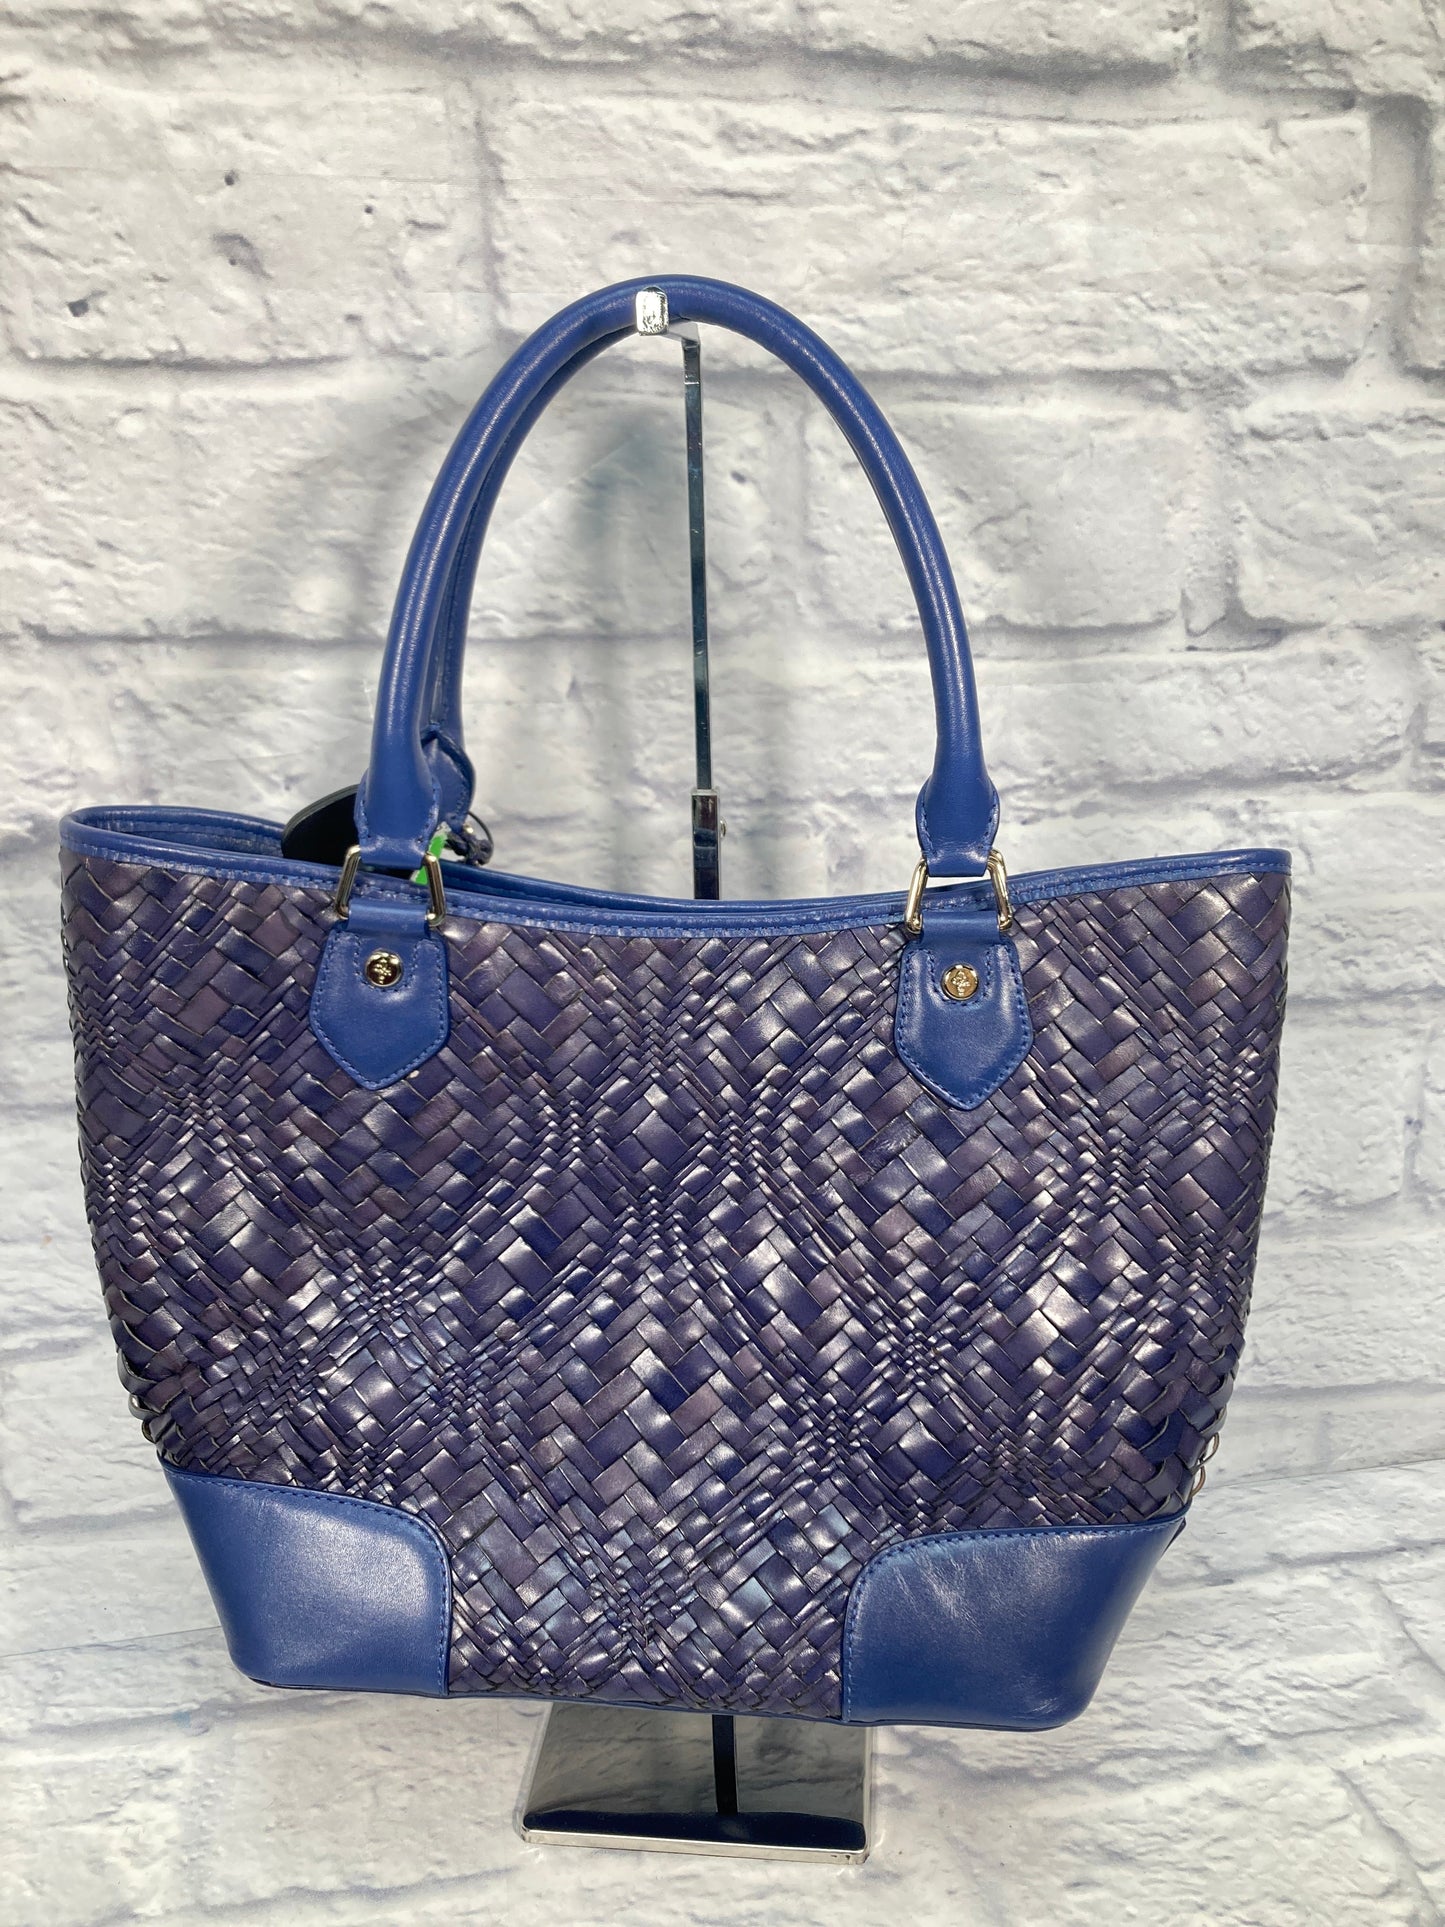 Tote Designer By Cole-haan  Size: Large